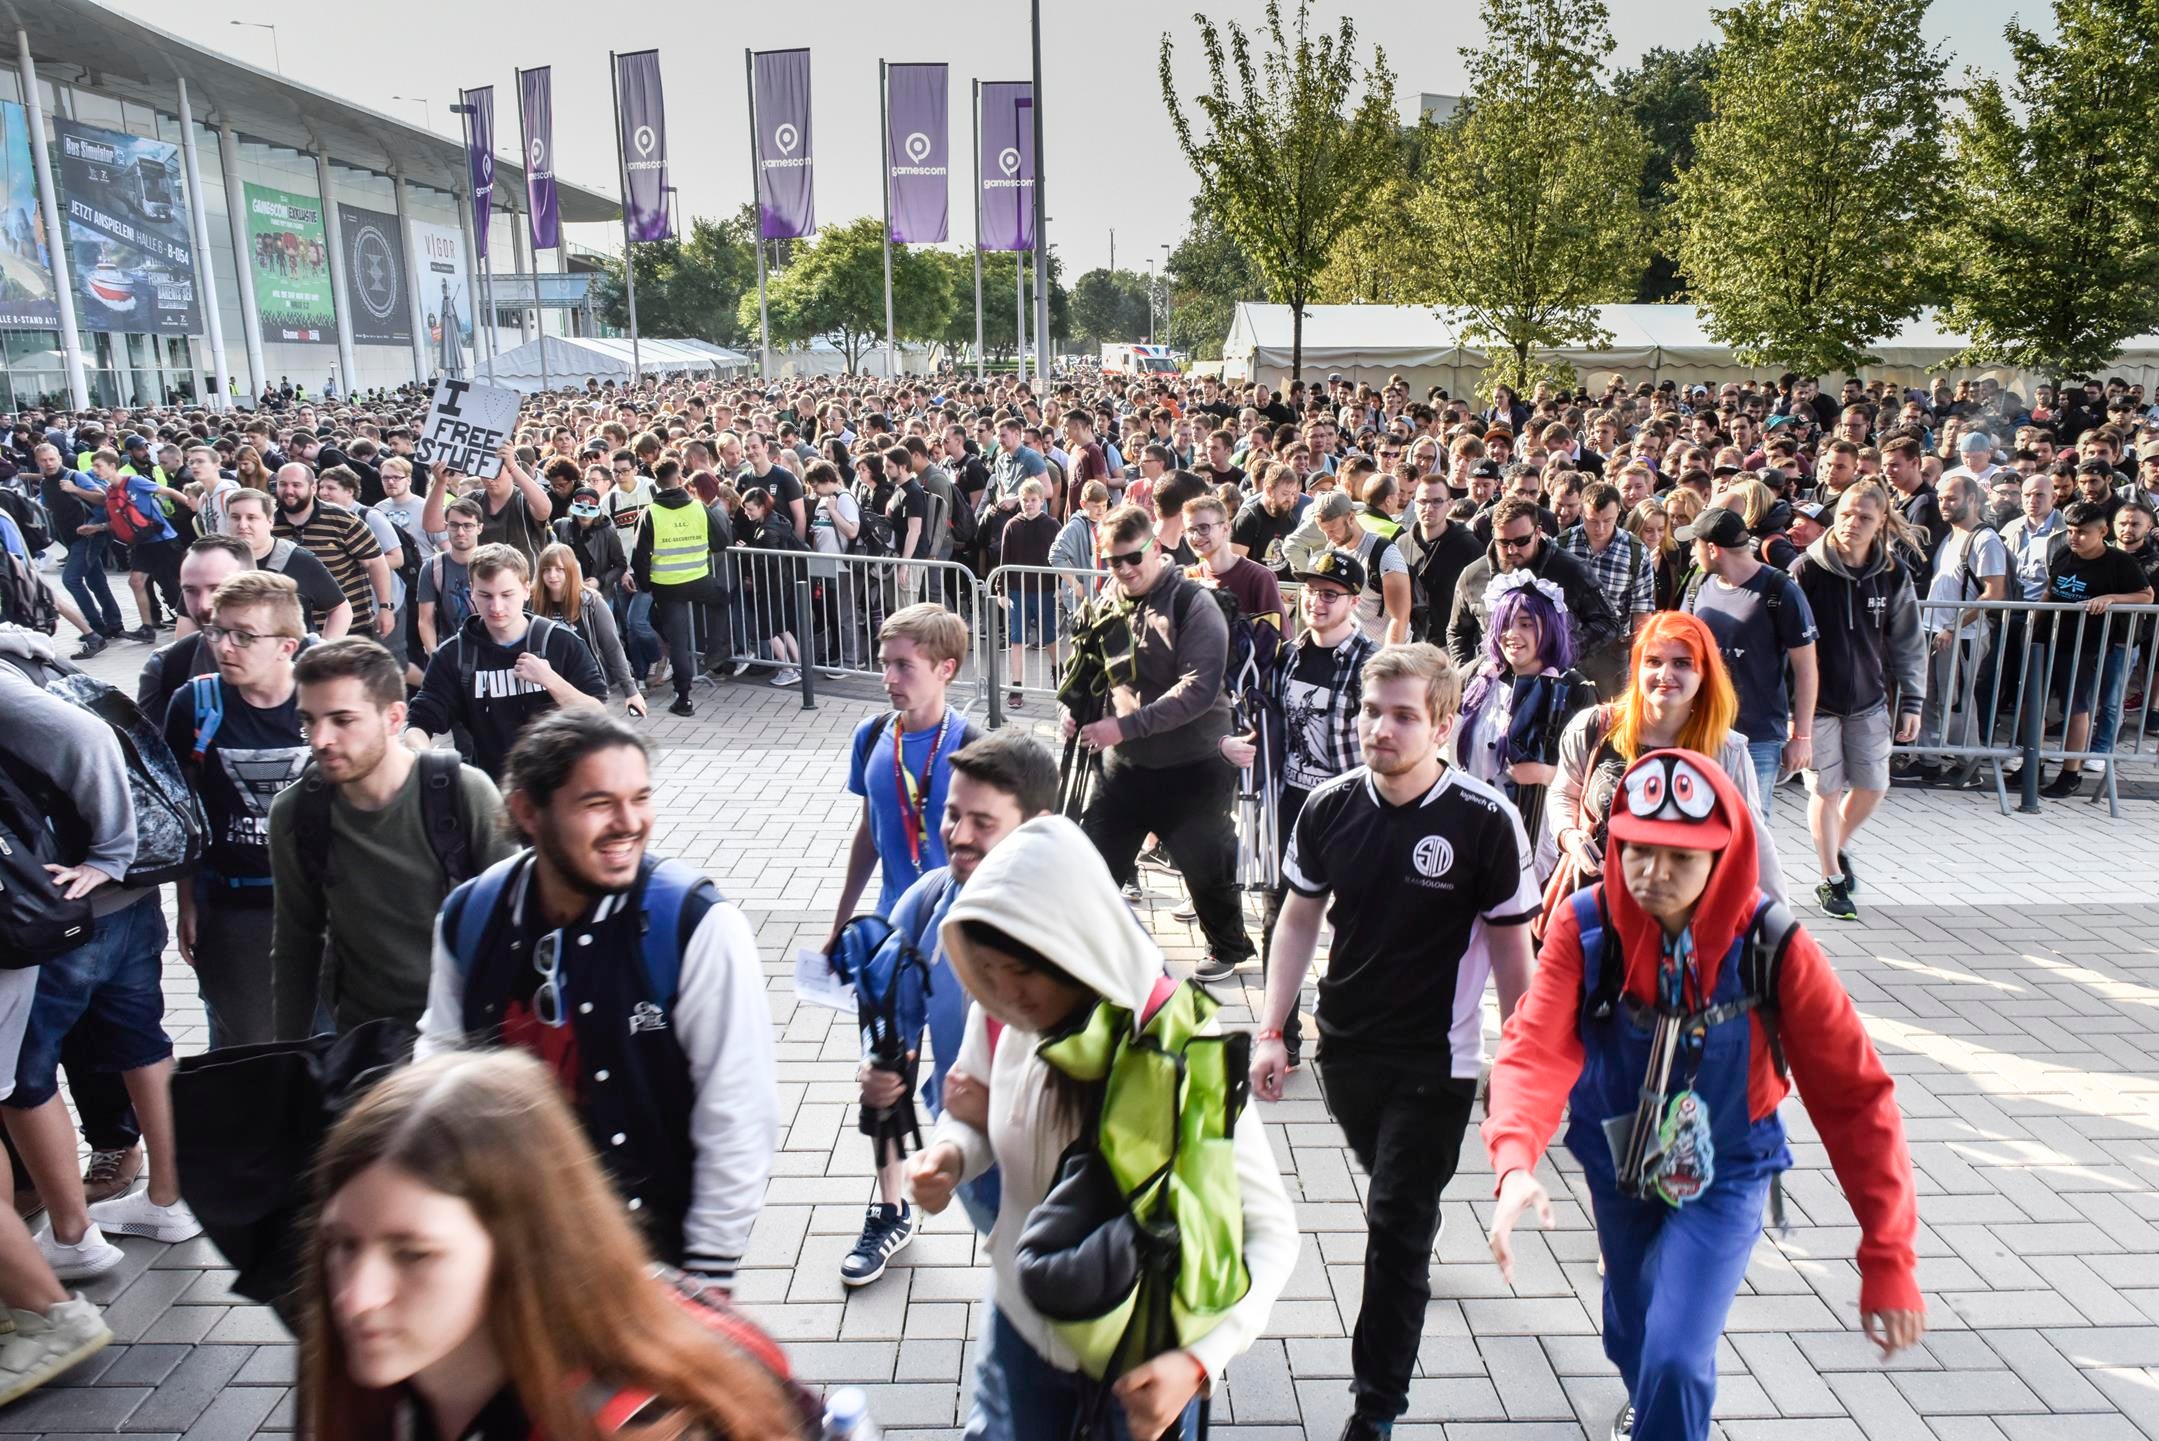 Image for Gamescom 2020 proceeding as planned for now